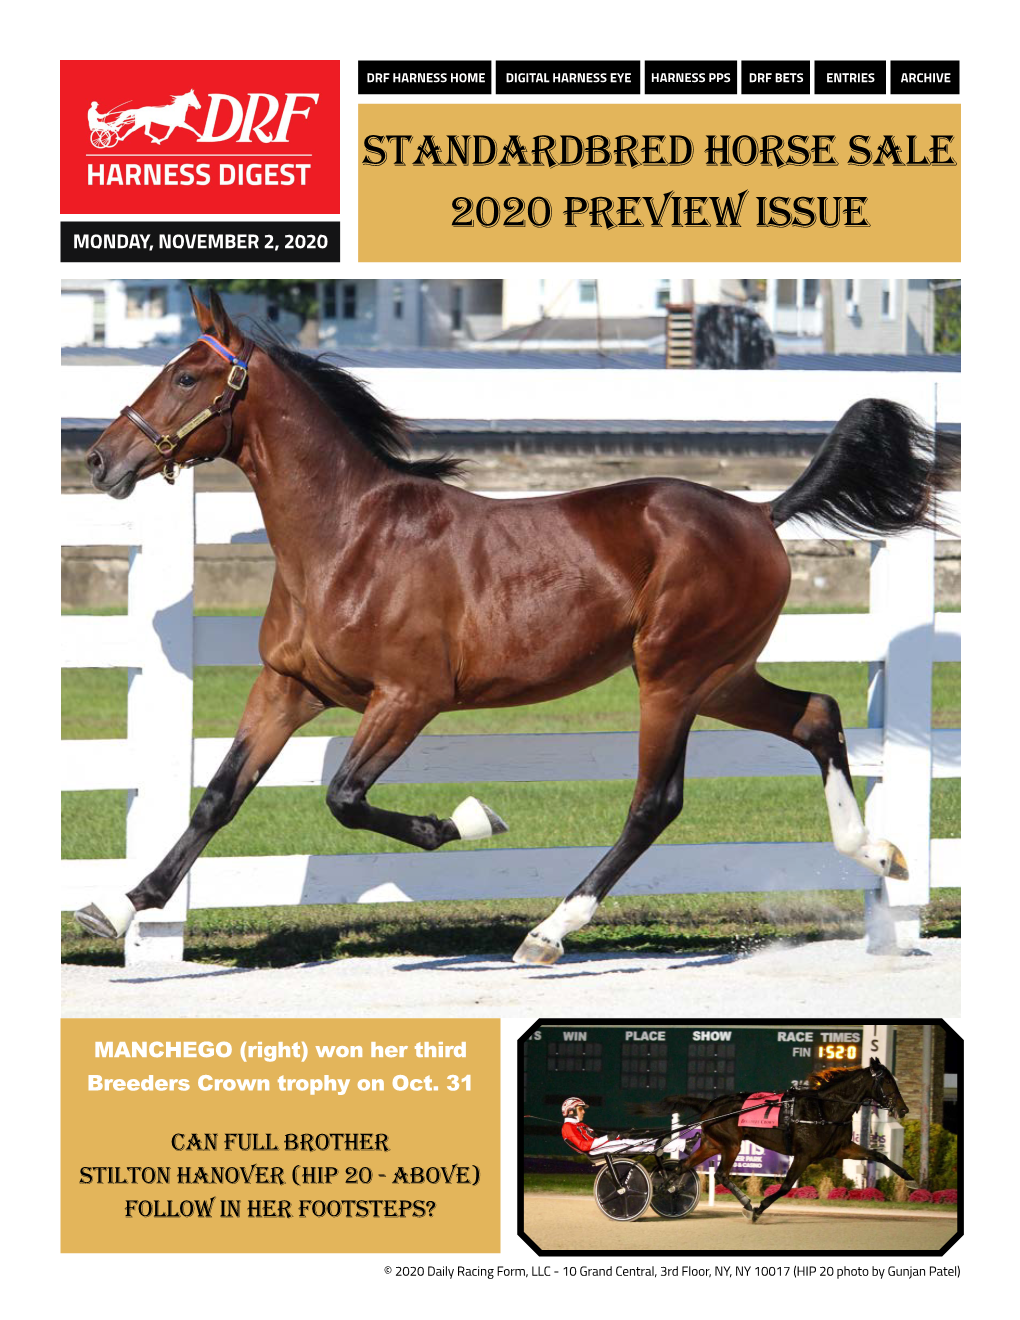 Standardbred Horse Sale 2020 PREVIEW Issue MONDAY, NOVEMBER 2, 2020